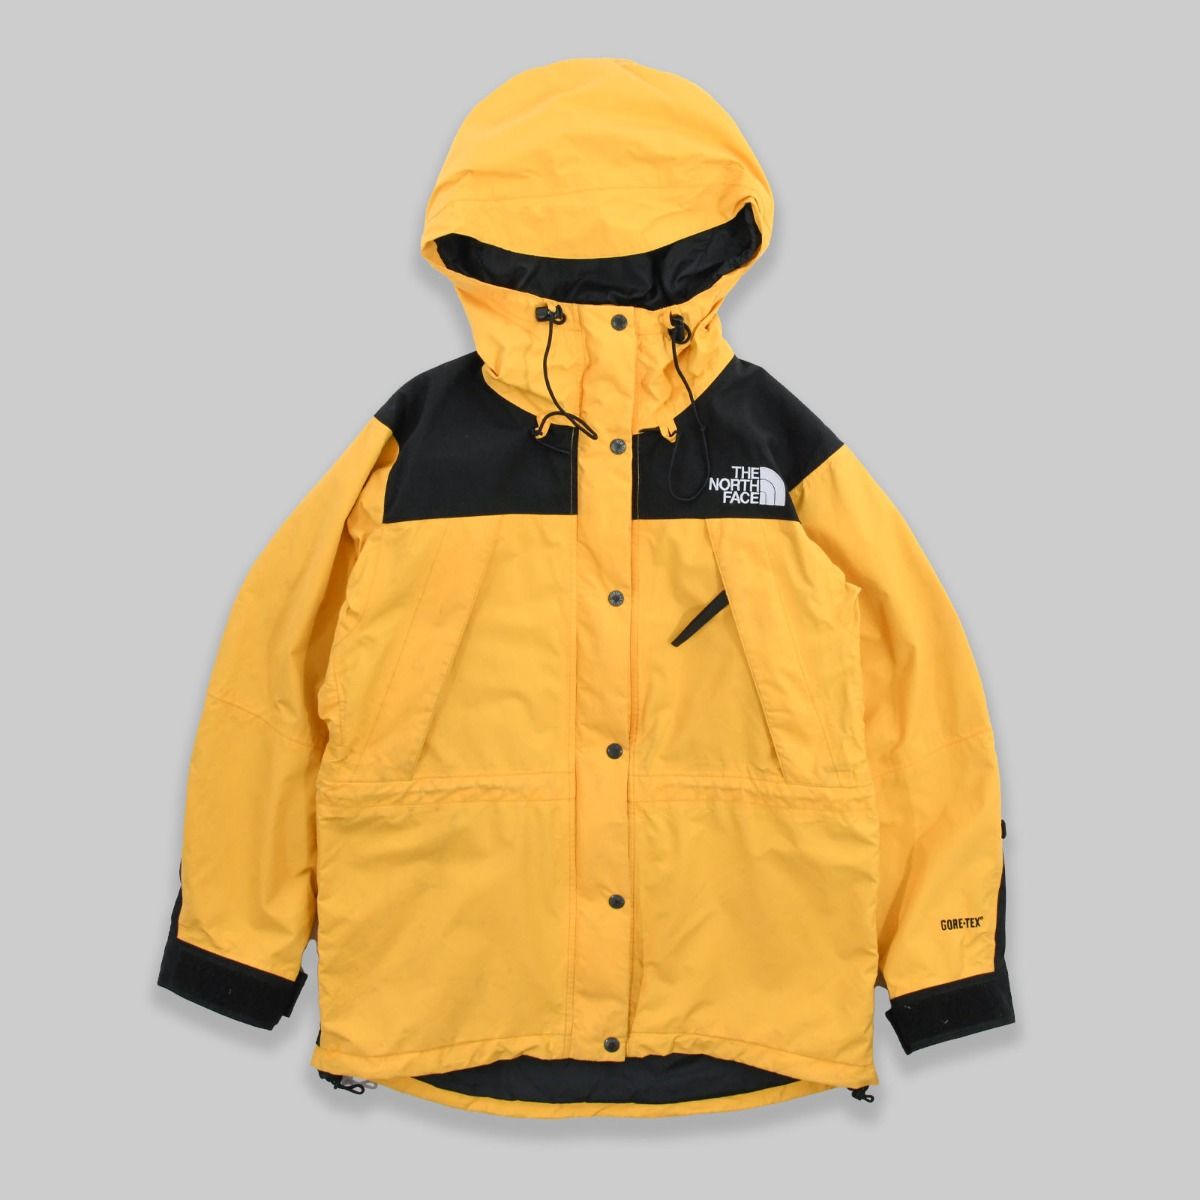 The North Face 1990s Gore-Tex Mountain Jacket